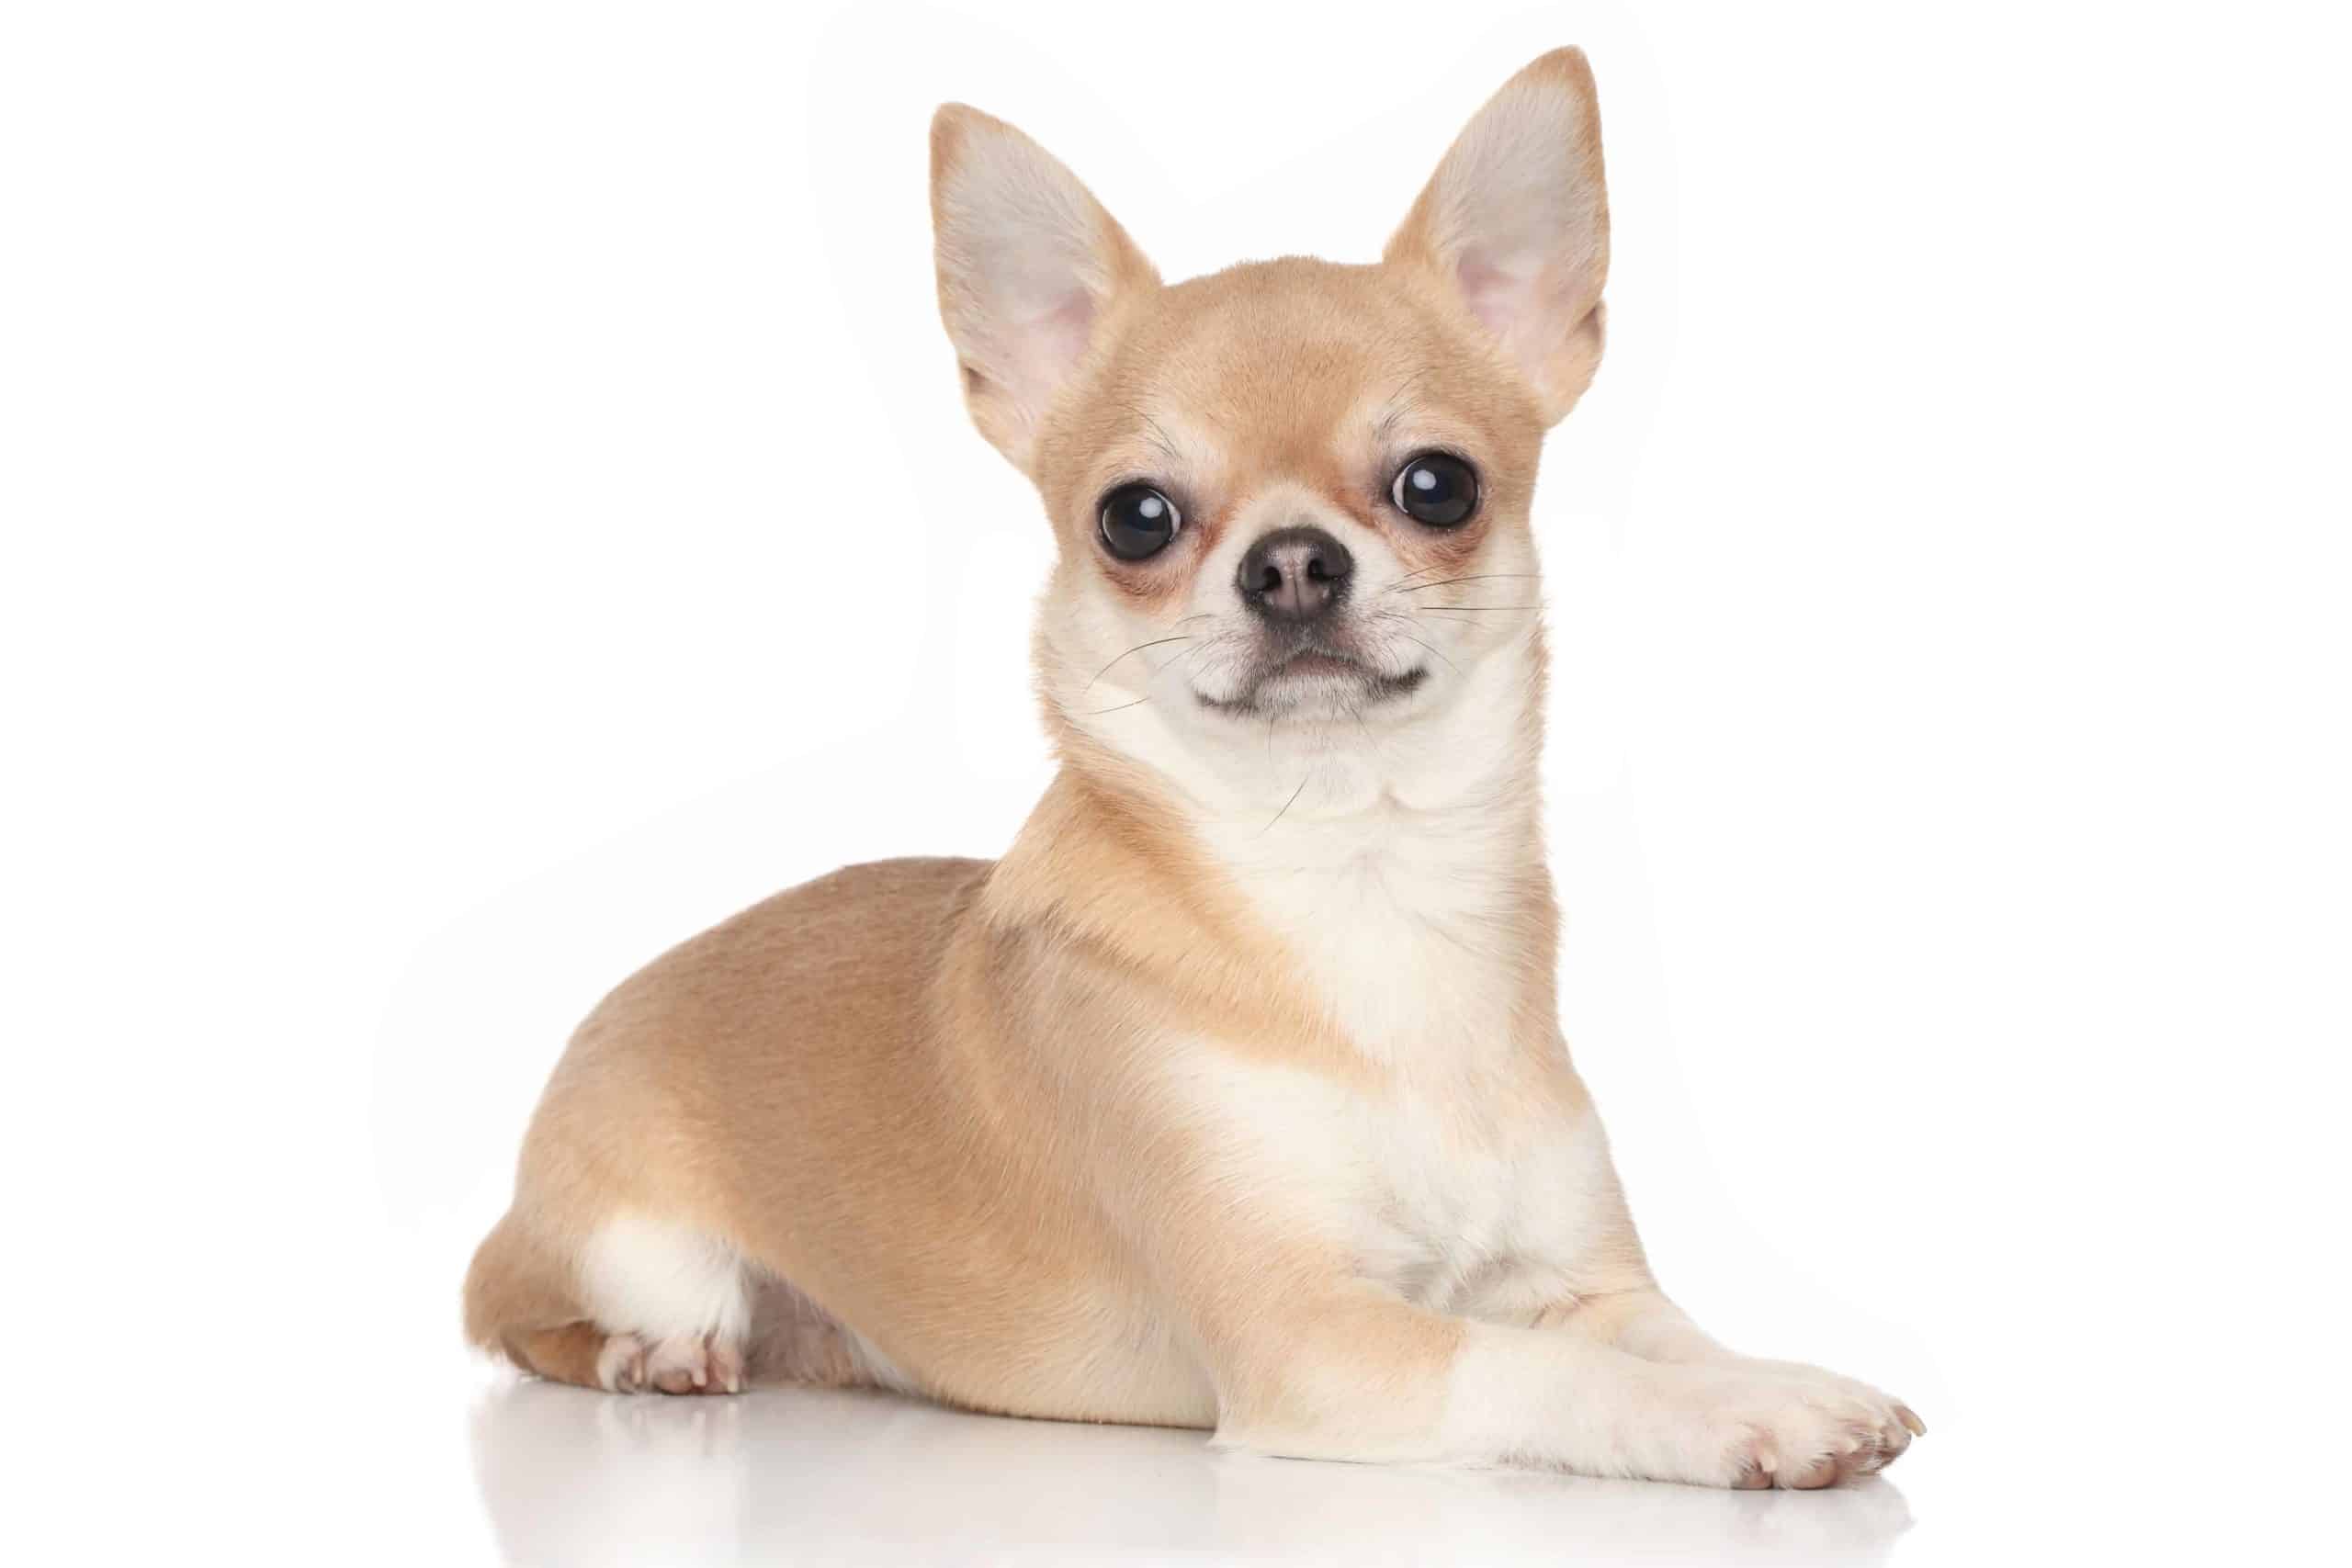 Chihuahua on white background.